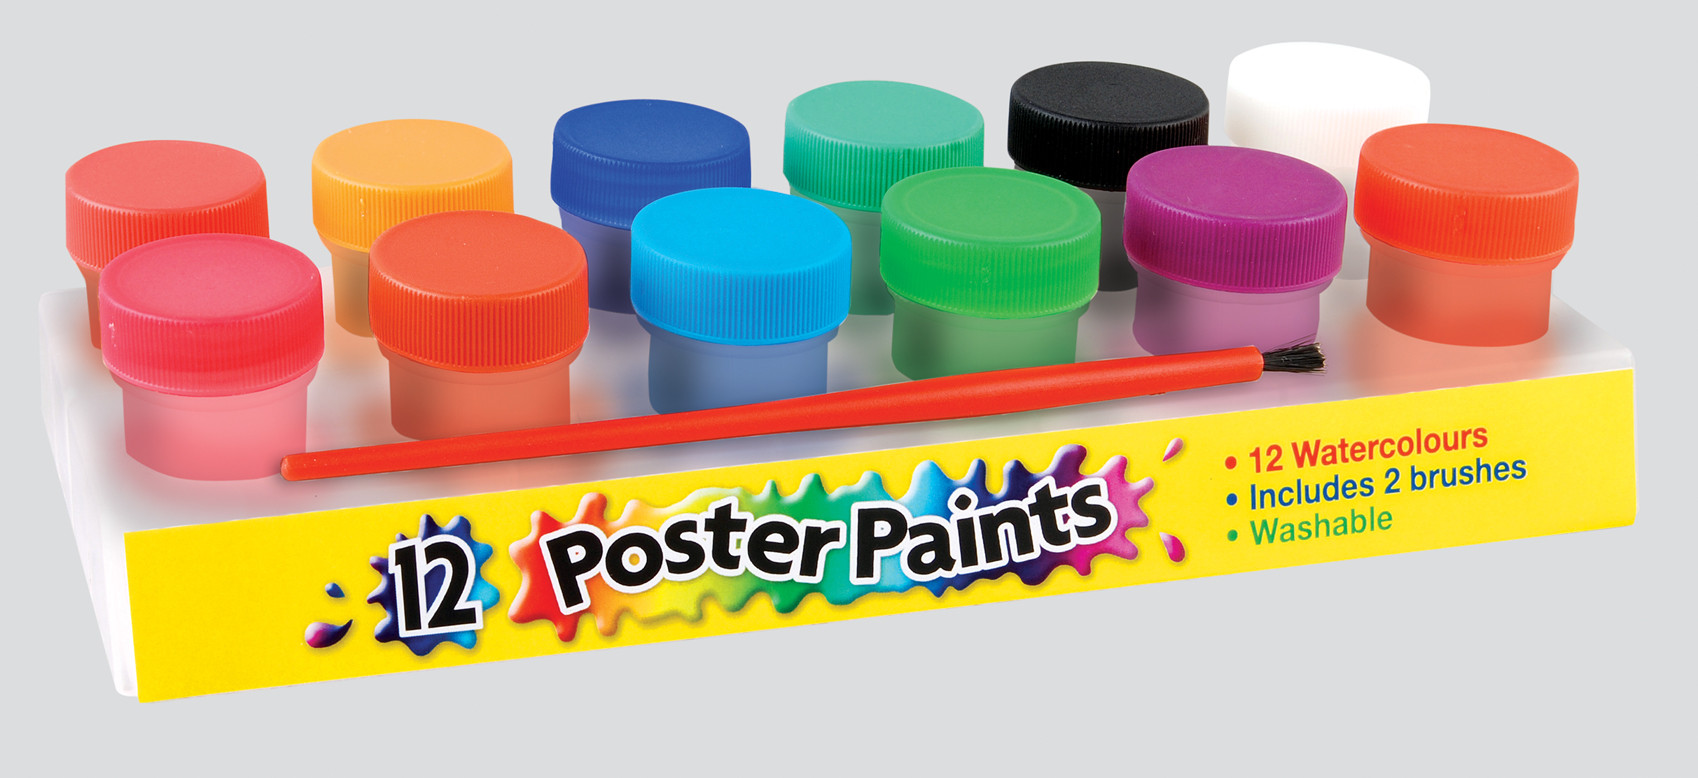 Best Poster Paints for Nail Art - wide 2